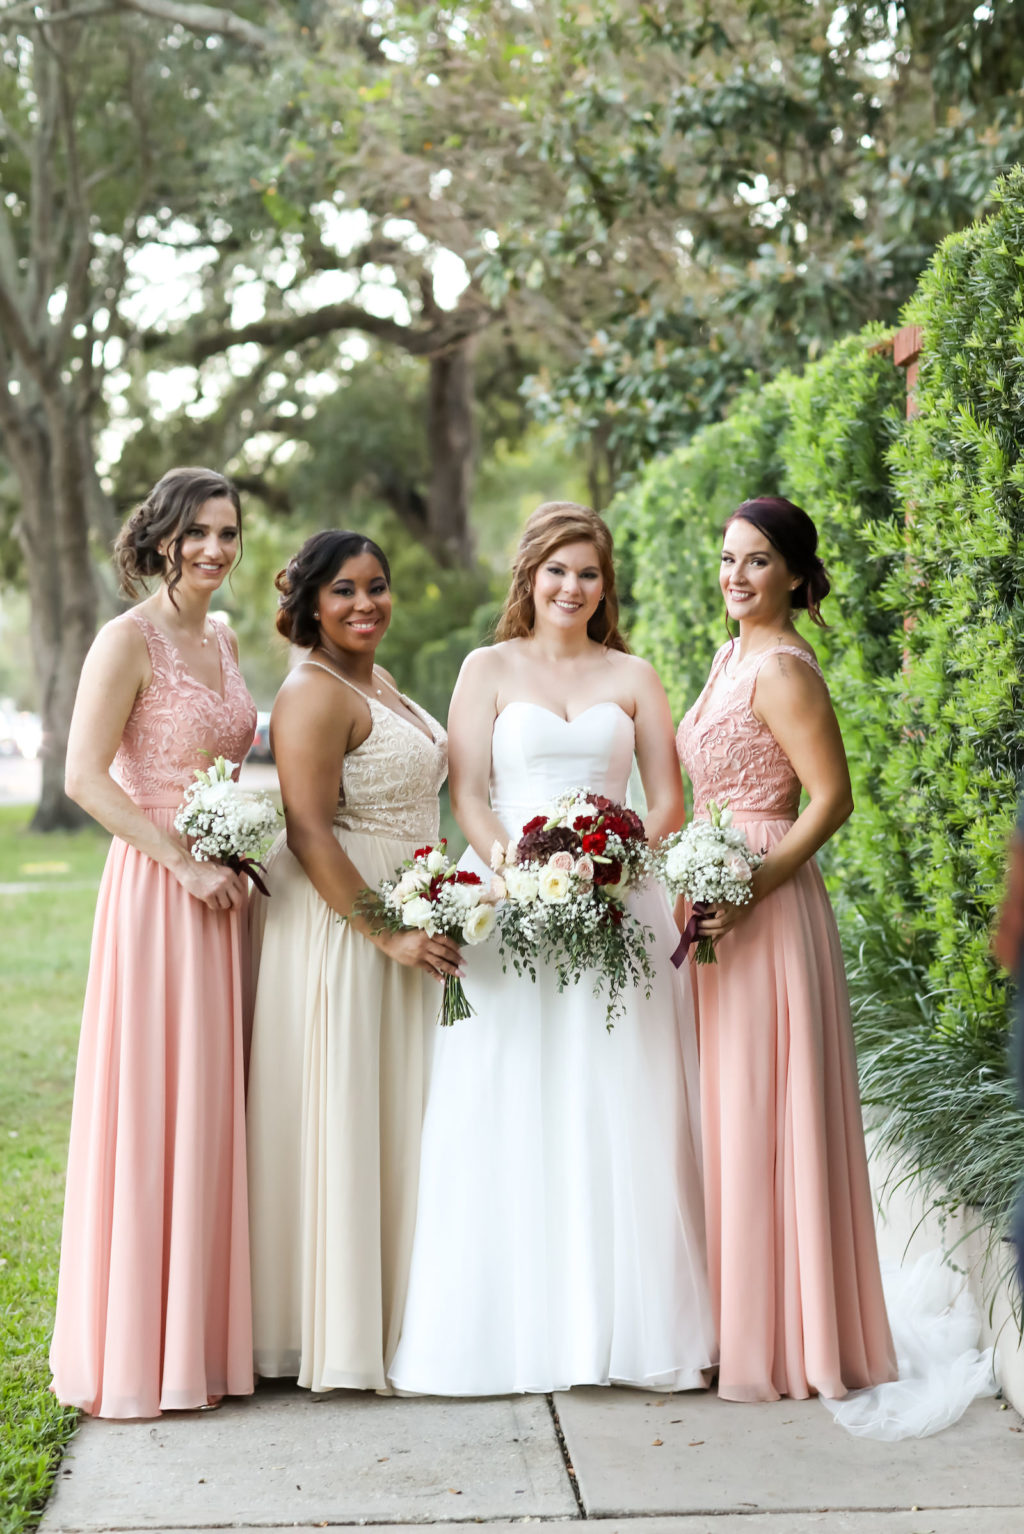 Bride and Bridesmaids Outdoor Portrait | Bride Wearing Organza Sweetheart Neckline Sincerity Bridal Gown Wedding Dress | Blush Pink Peach Champagne Long Chiffon and Lace Bridesmaid Dresses by Kennedy Blue | Bridal Wedding Bouquet with Burgundy and White Hydrangea, Red Carnations, White Roses, Baby's Breath and Greenery